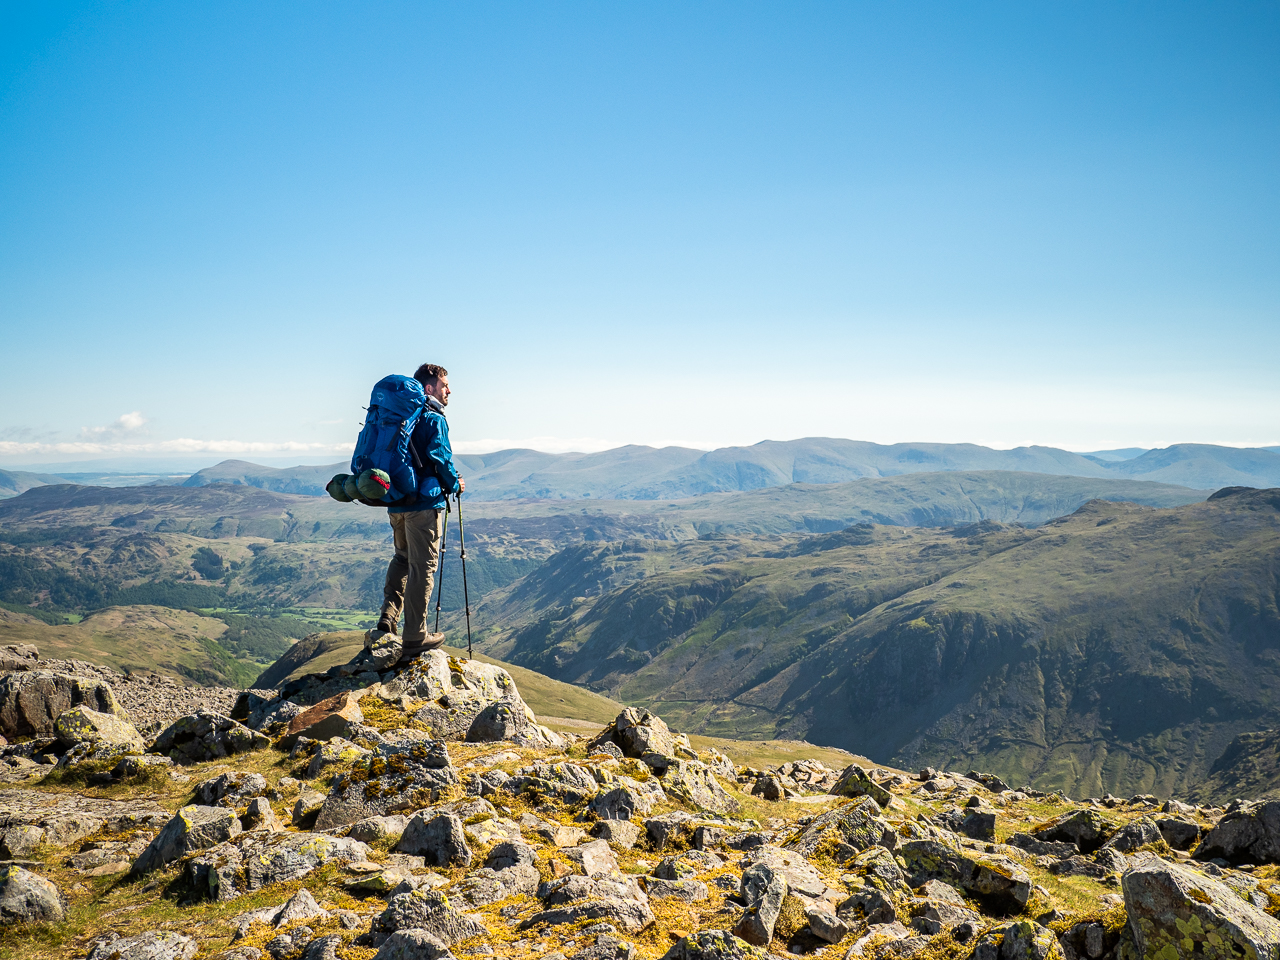 Travel photography England: A hiker views the horizon from Great Gable, a mountain in the Lake District, Cumbria, England.